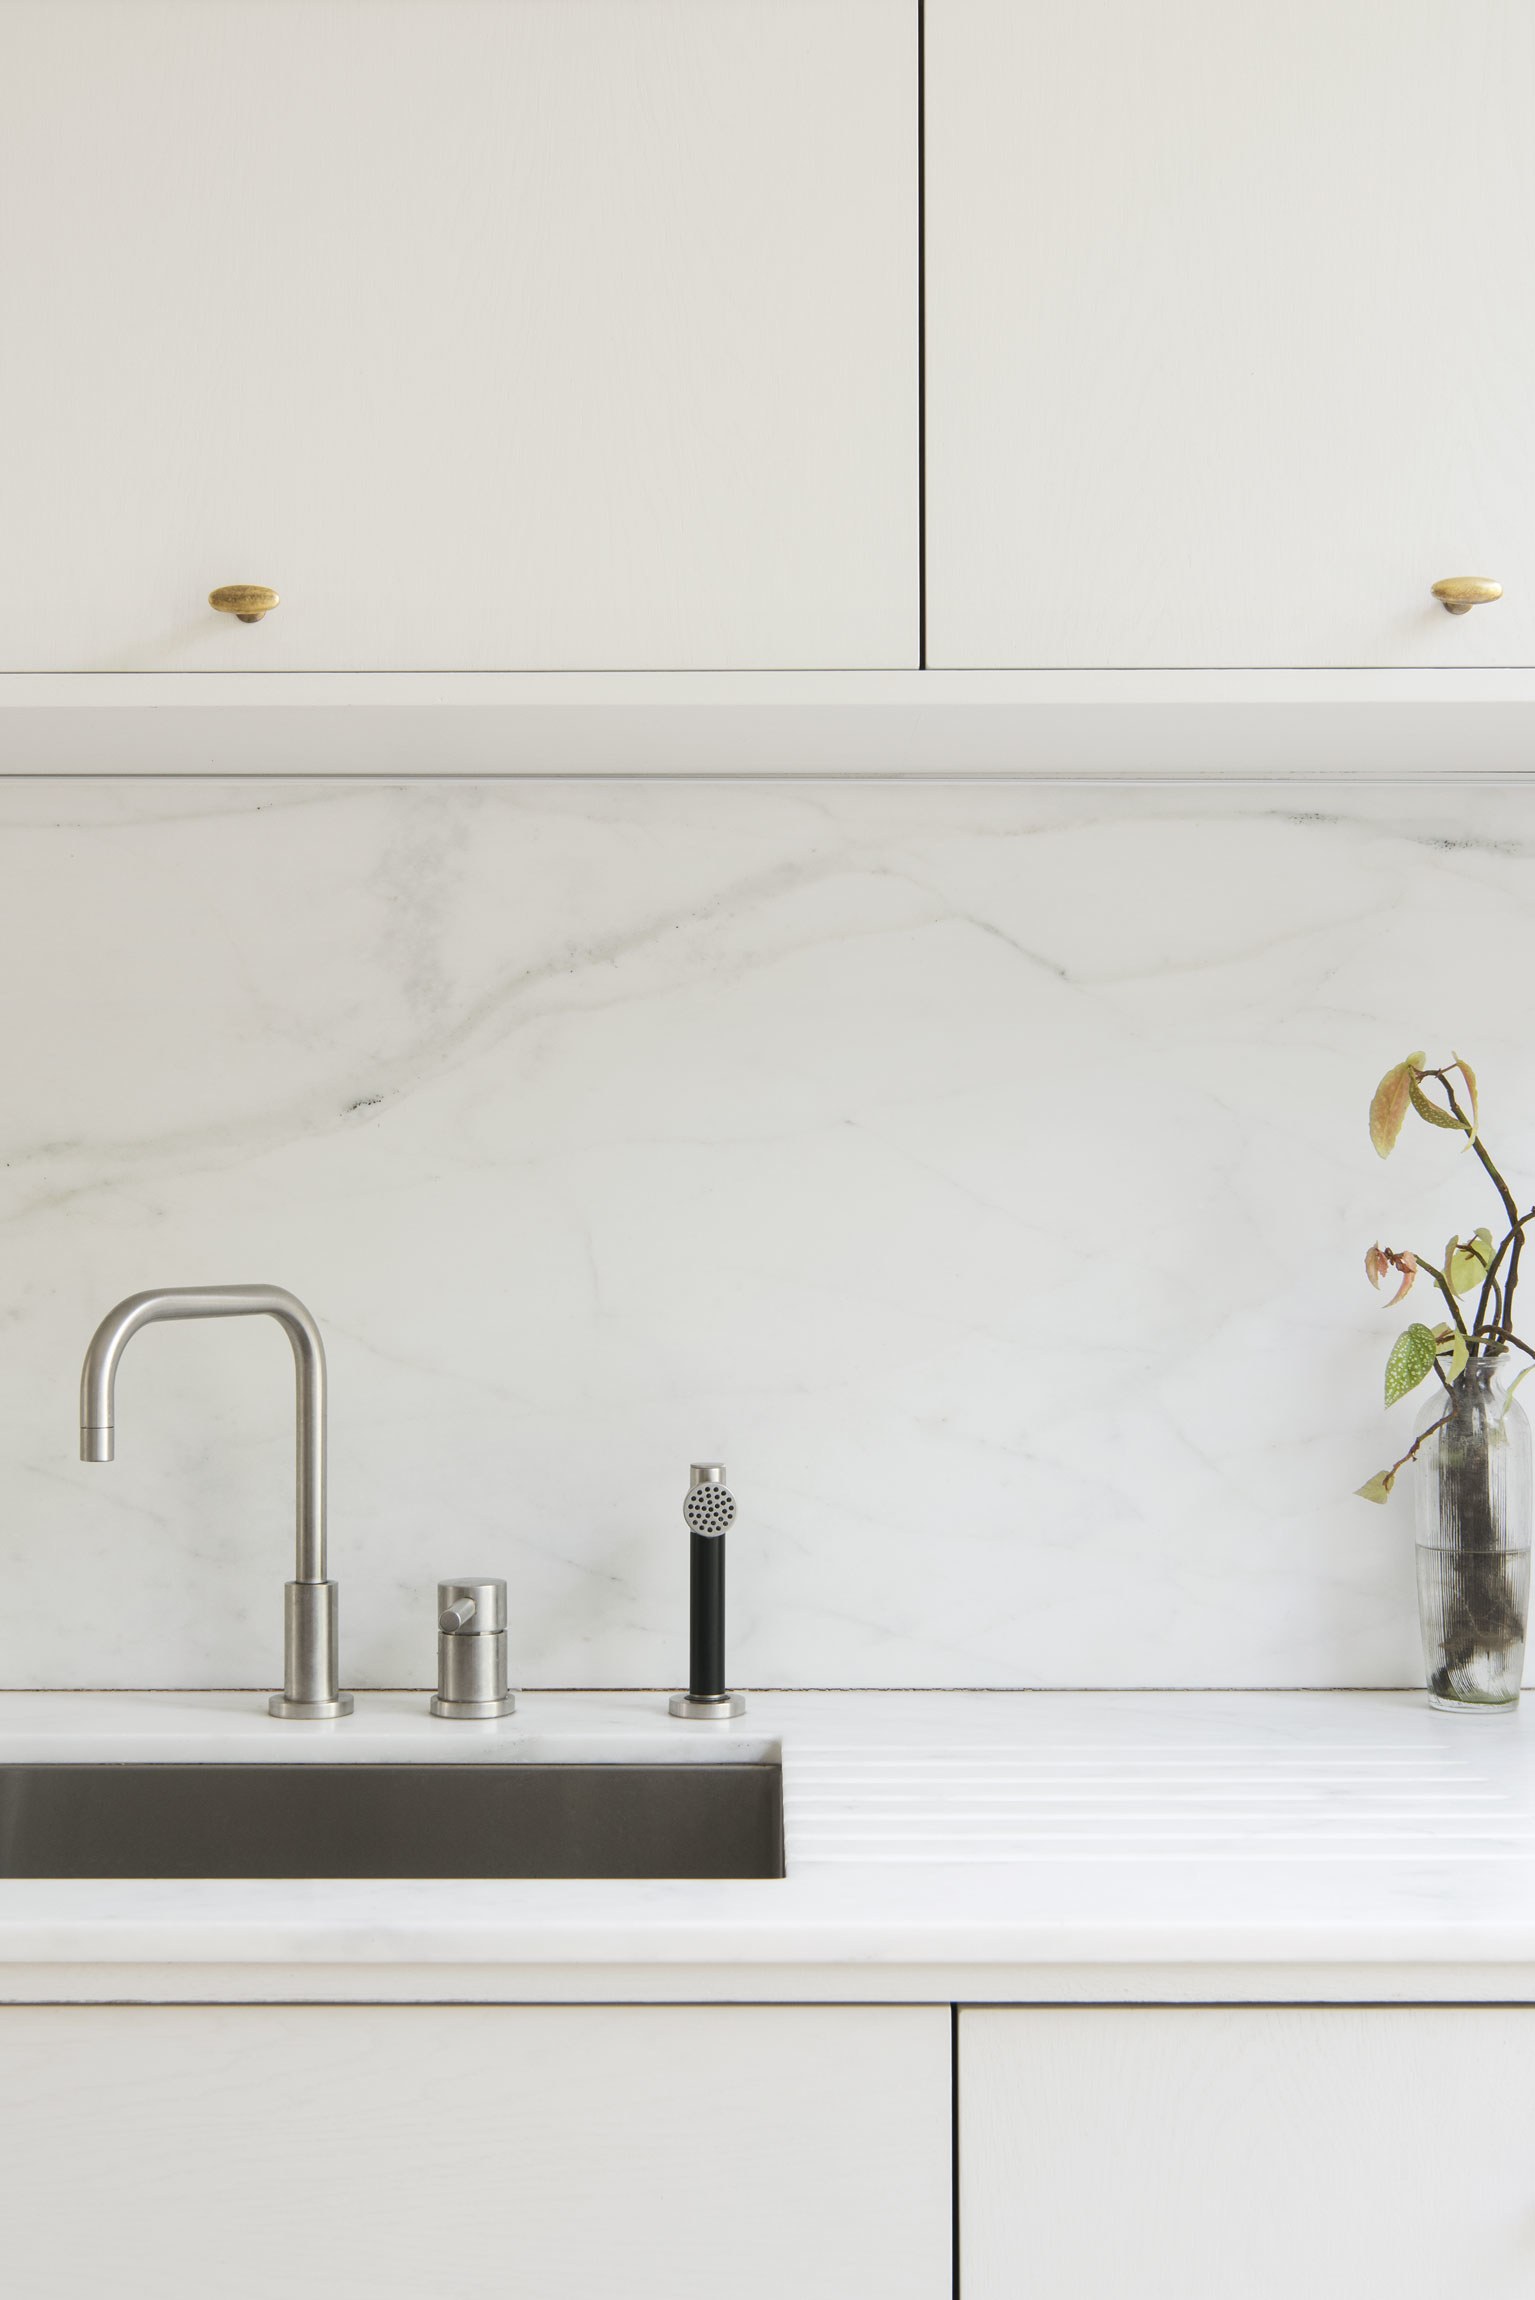  Look closely and you'll see a drain board etched right into the marble countertop. Set a few dripping dishes on top and the water will drain right into the sink, says Roberts. It's a simple customization you can request through your marble fabricato